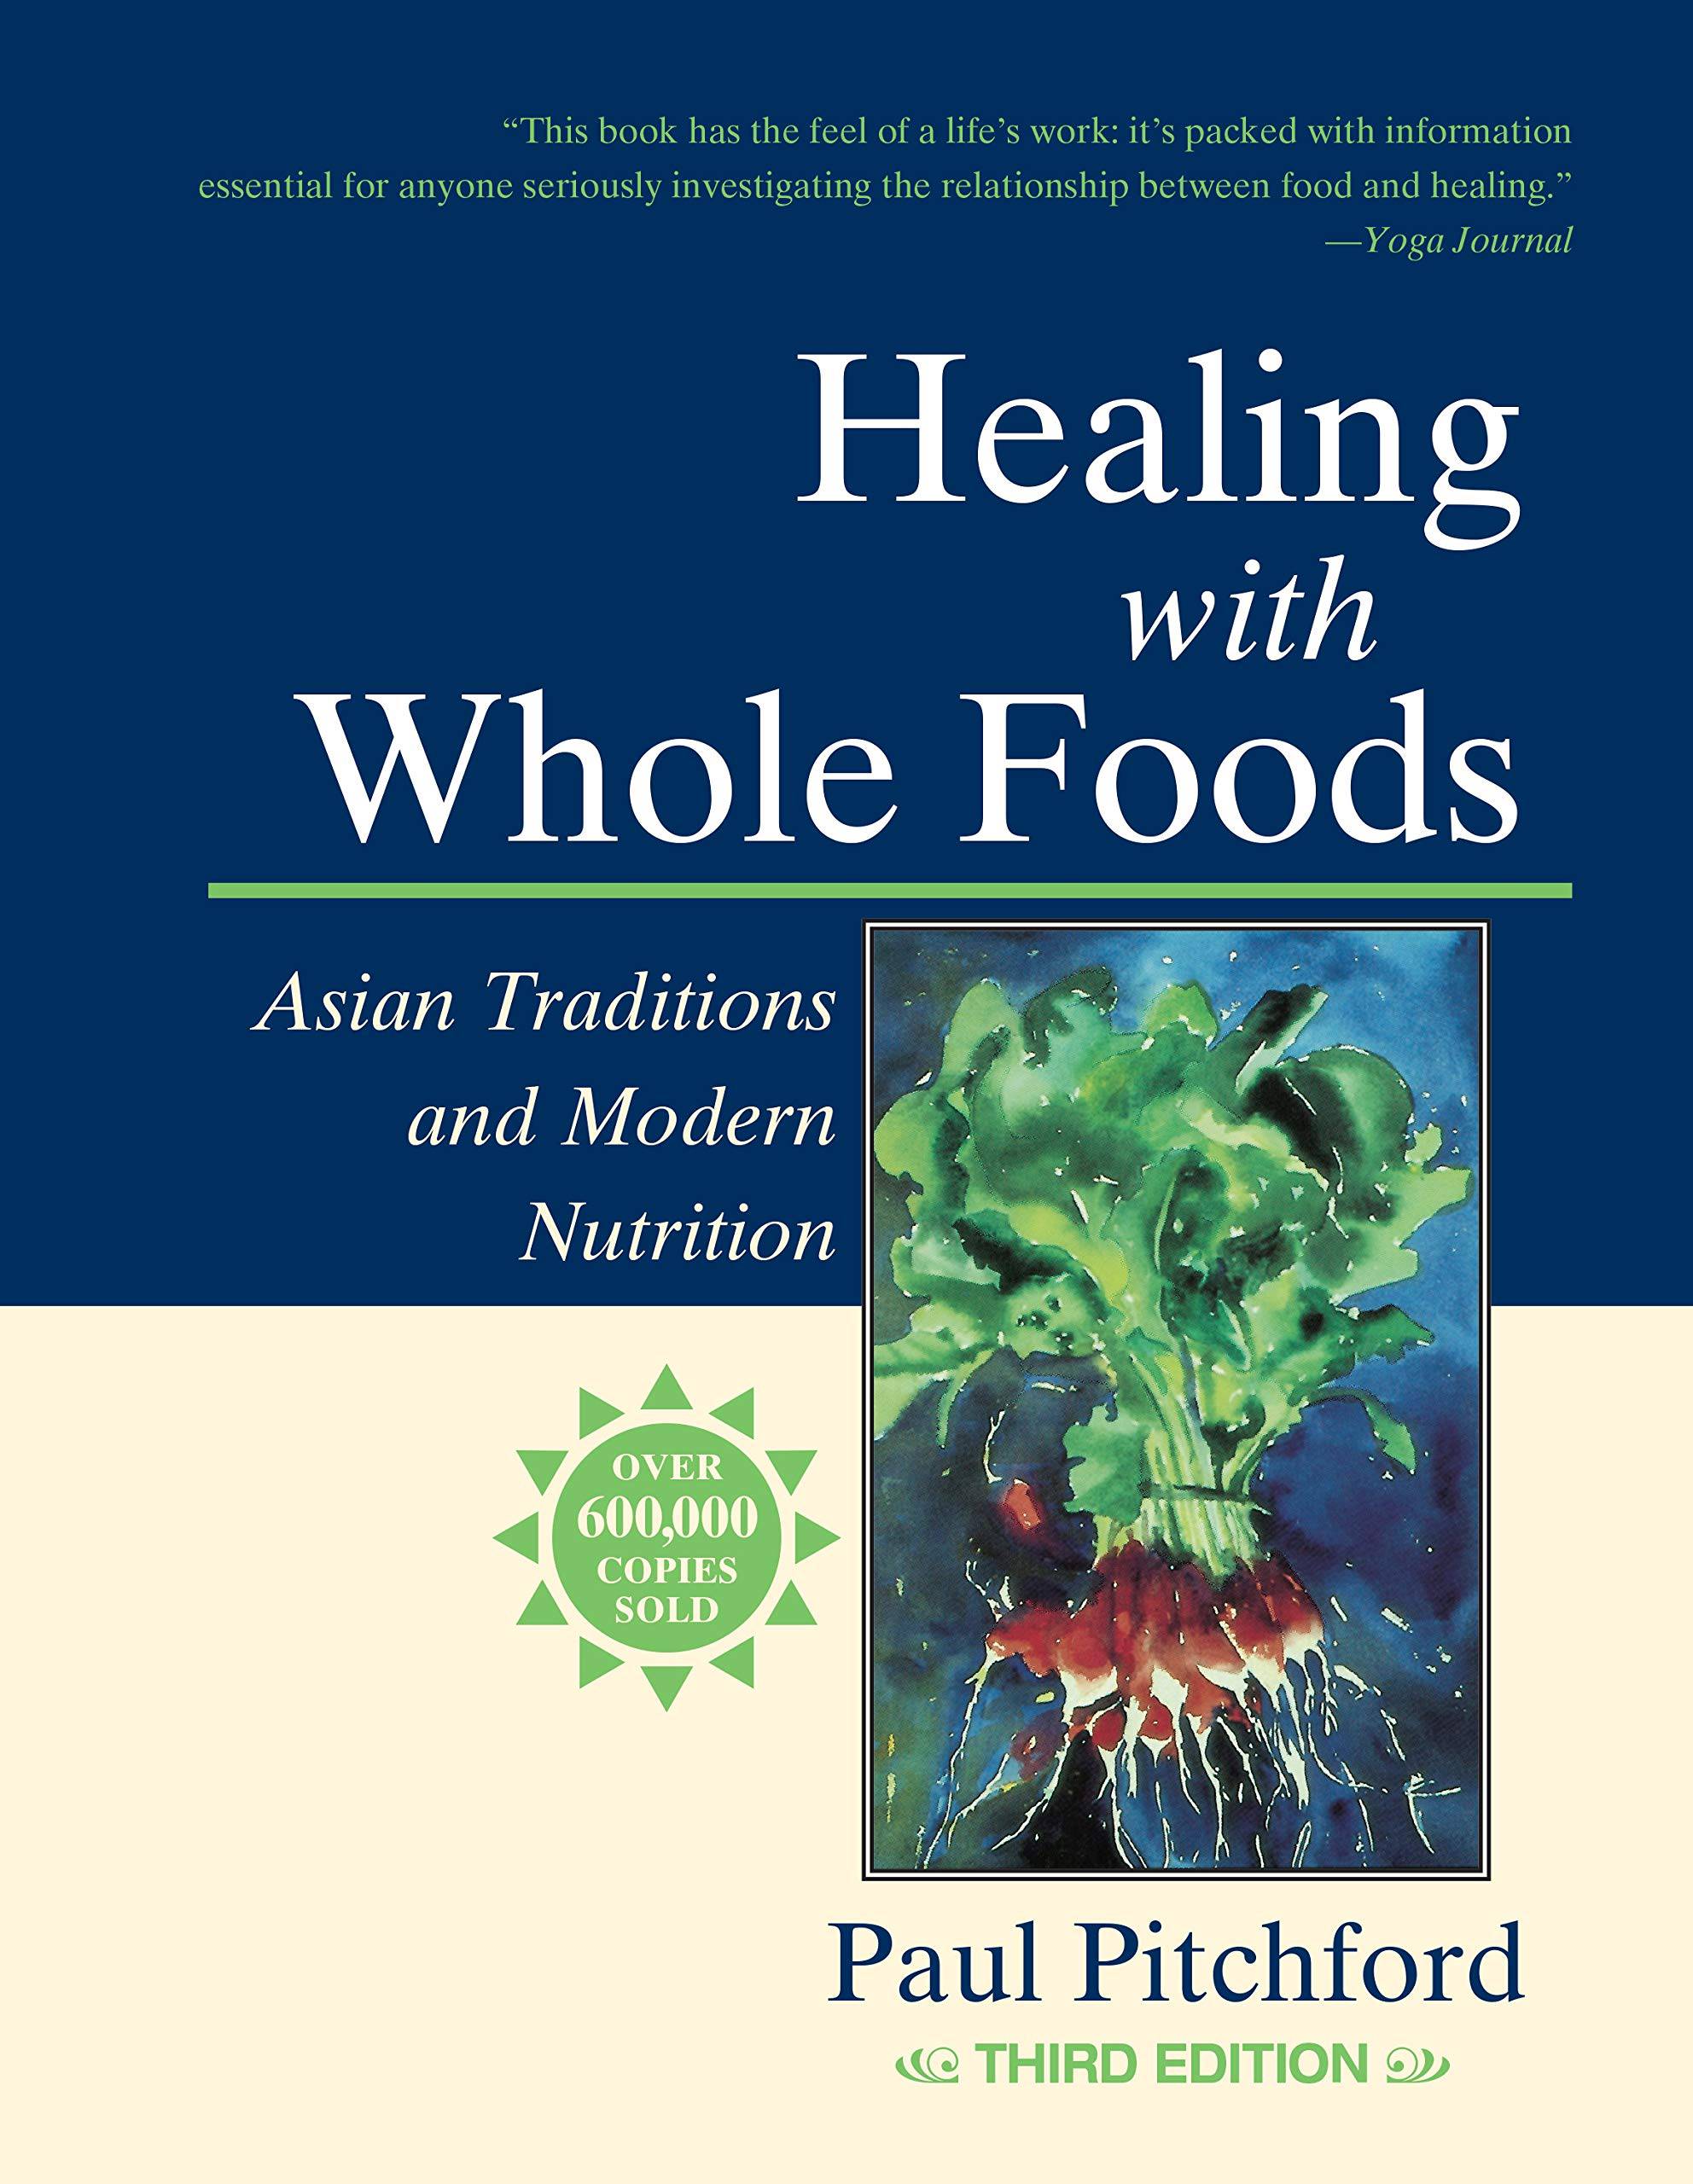 Healing with whole foods by Paul Pitchford